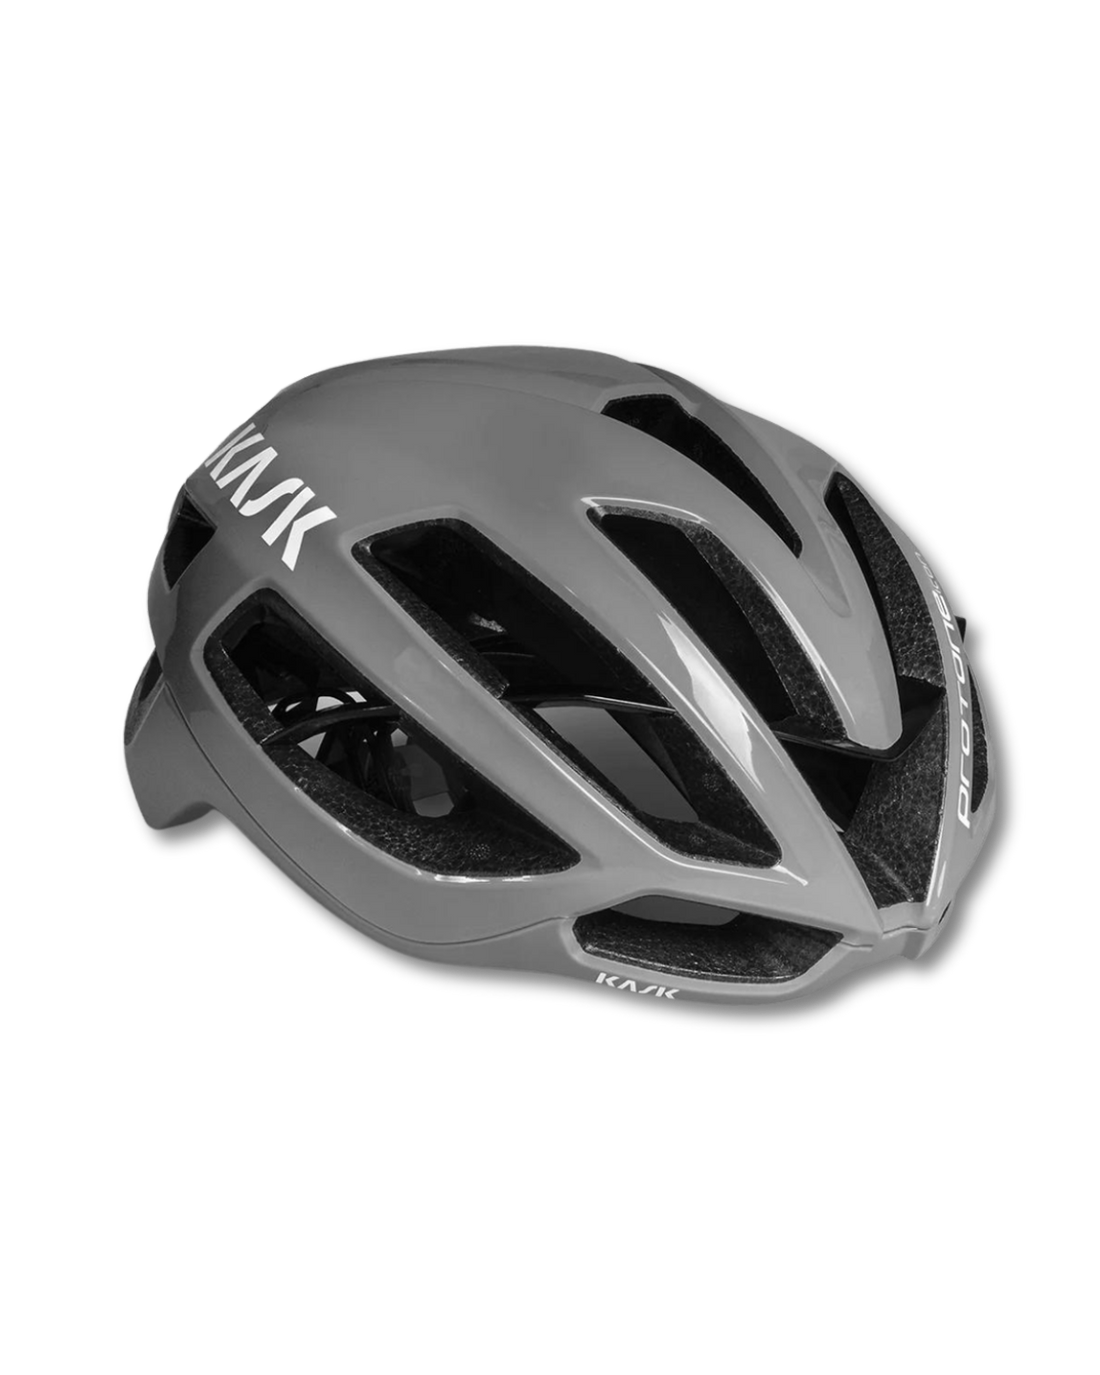 Kask Protone Icon ヘルメット - グレー